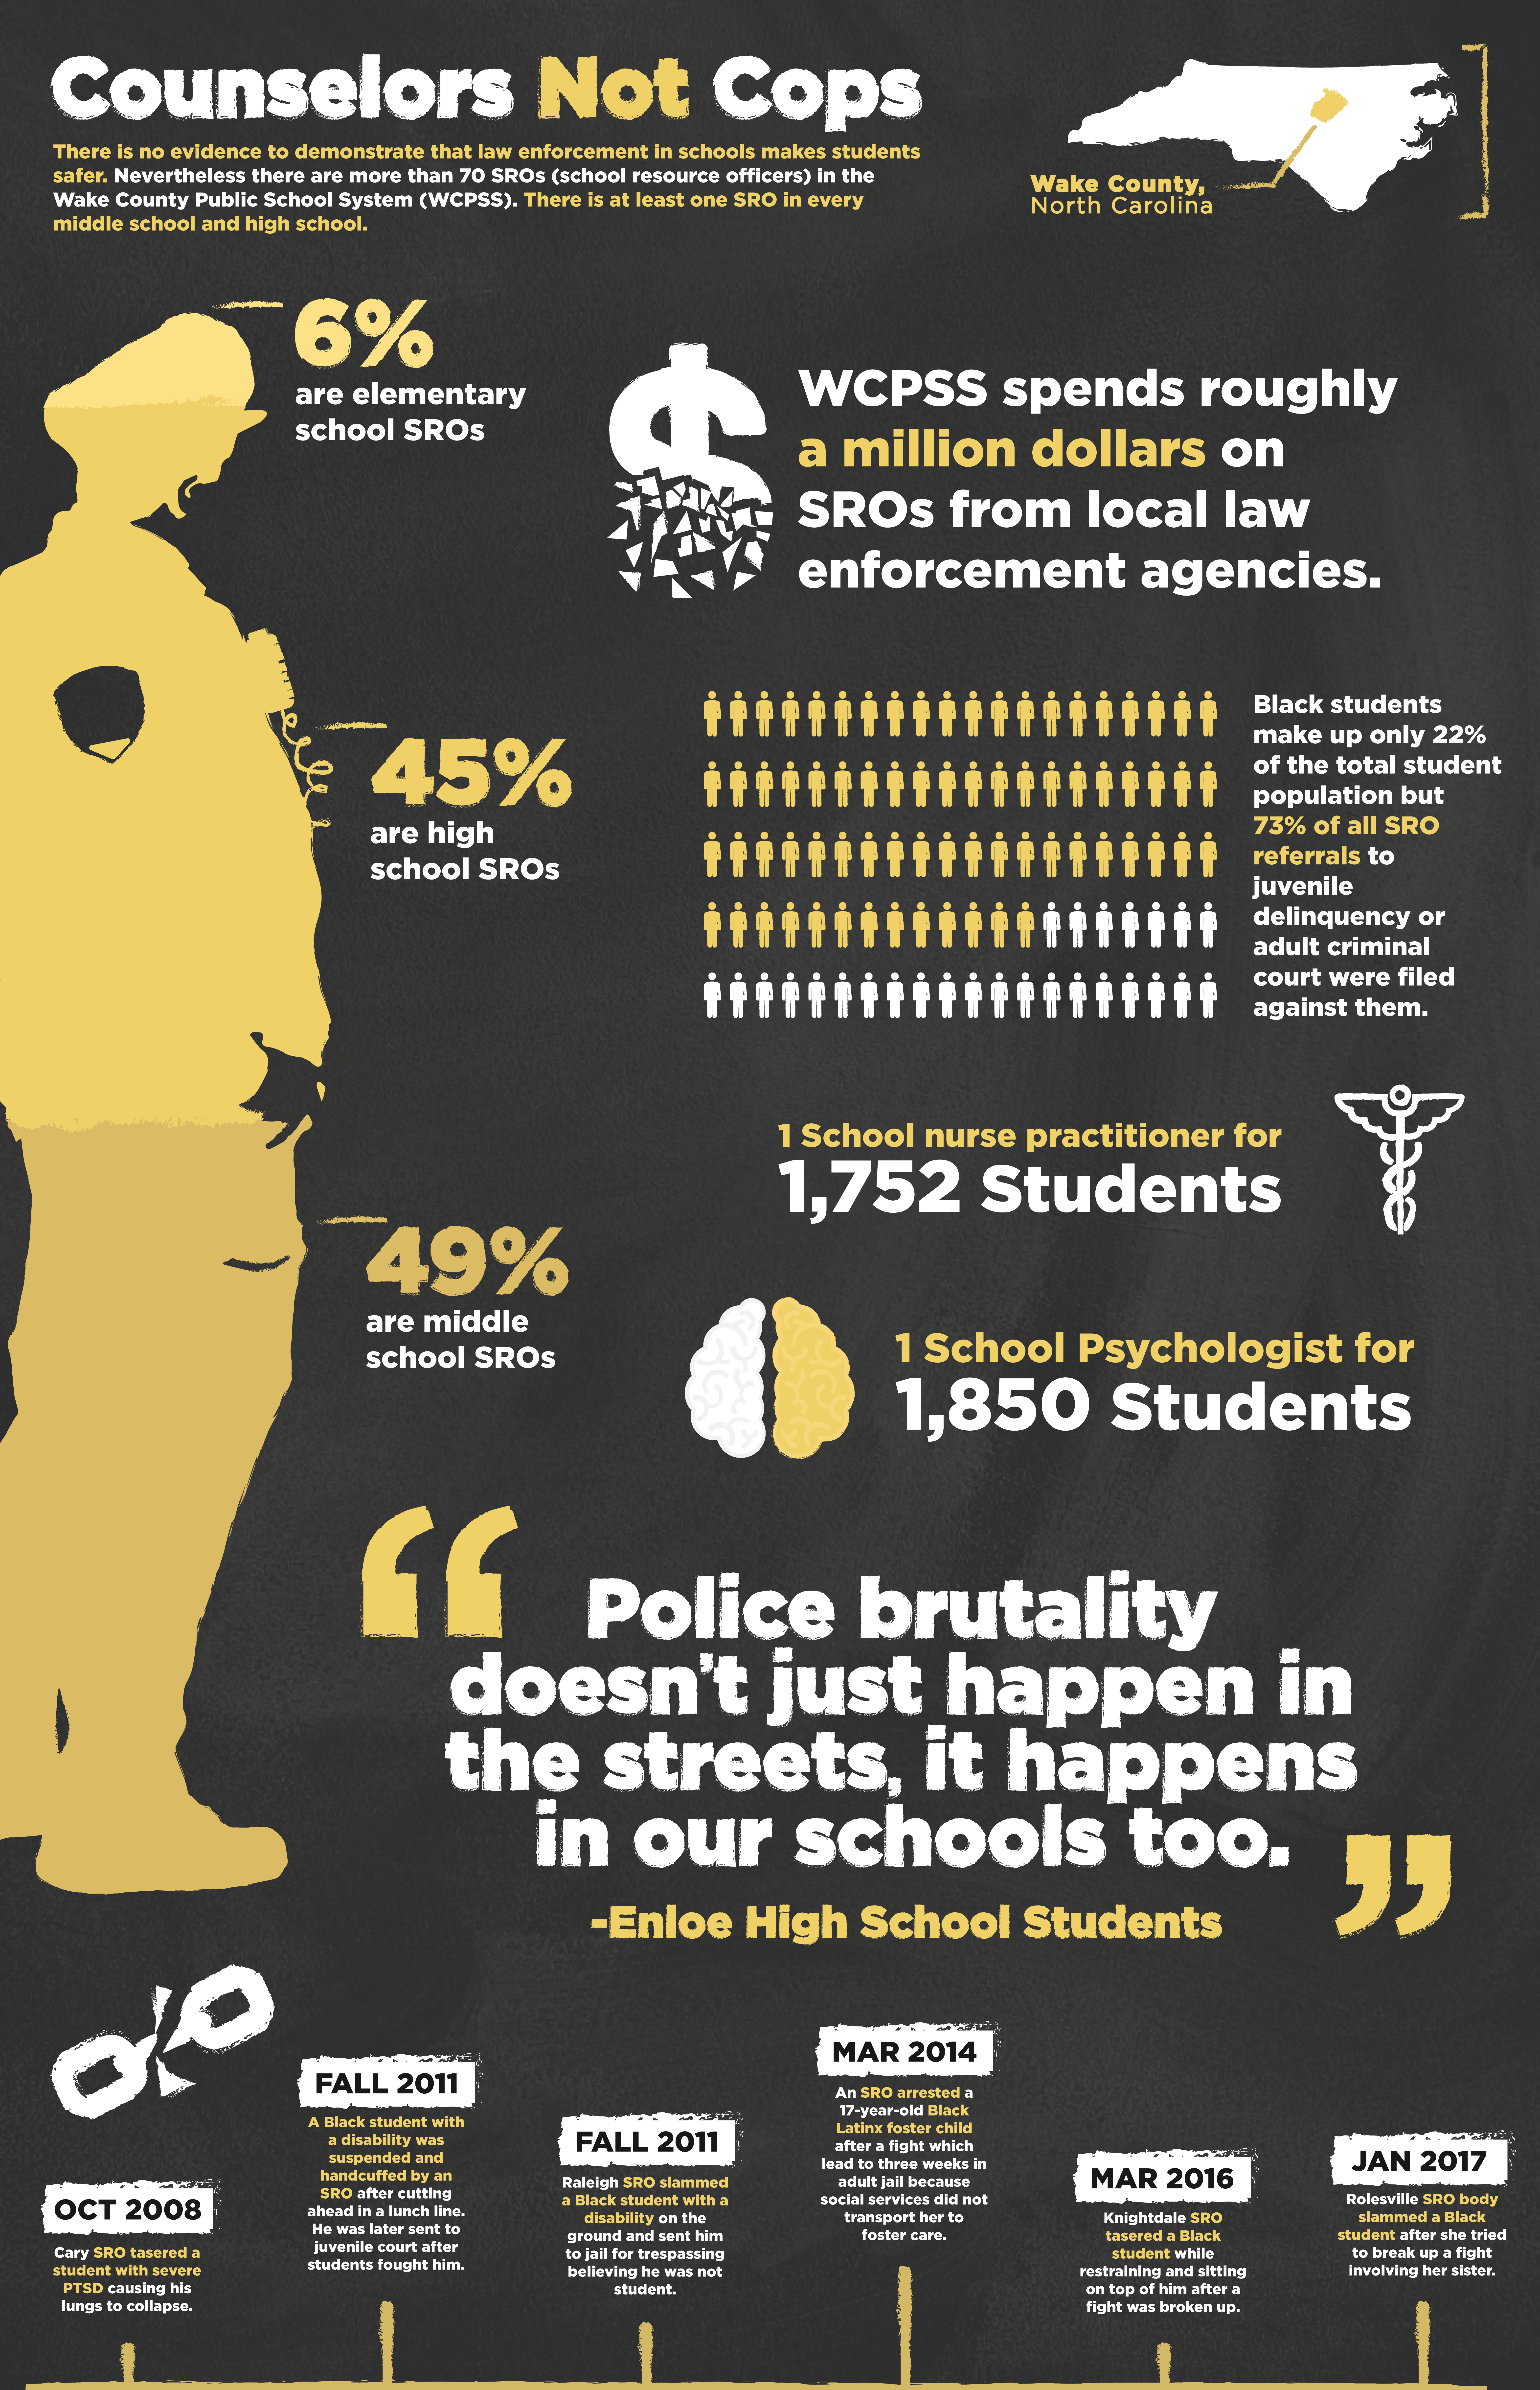 Large poster-size infographic reminiscent of a chalkboard named Counselors Not Cops with the state of North Carolina in white at the top with a yellow line pointing to Wake County. 

There is a police officer in yellow on the left as a bar graph showing the percentage of SROs in Wake County Schools. 49% of police officers or school resource officers (SROs) are in middle school, 45% are in high school, and 6% are in middle school. 

On the right, there is a money sign that shatters like glass. Next to this money sign is text that says WCPSS spends roughly a million dollars on SROs from local law enforcement agences.

Below, there are a 100 people icons with 73 colored yellow to represent that Black students make up 73% of SRO referrals to juvenile and adult court despite being only 22% of student enrollment.

Below this is a stat that says there is one school nurse for 1,752 students (medical icon on the right) and 1 school psychologist for 1,850 students. (brain icon with the right brain in yellow).

Below this is a quote in large text: Police brutality doesn't just happen in the streets, it happens in our schools too. - Enloe High School Students

At the very bottom is a timeline showing police brutality events in Wake County schools beginning in October 2008 and ending in January 2017.  